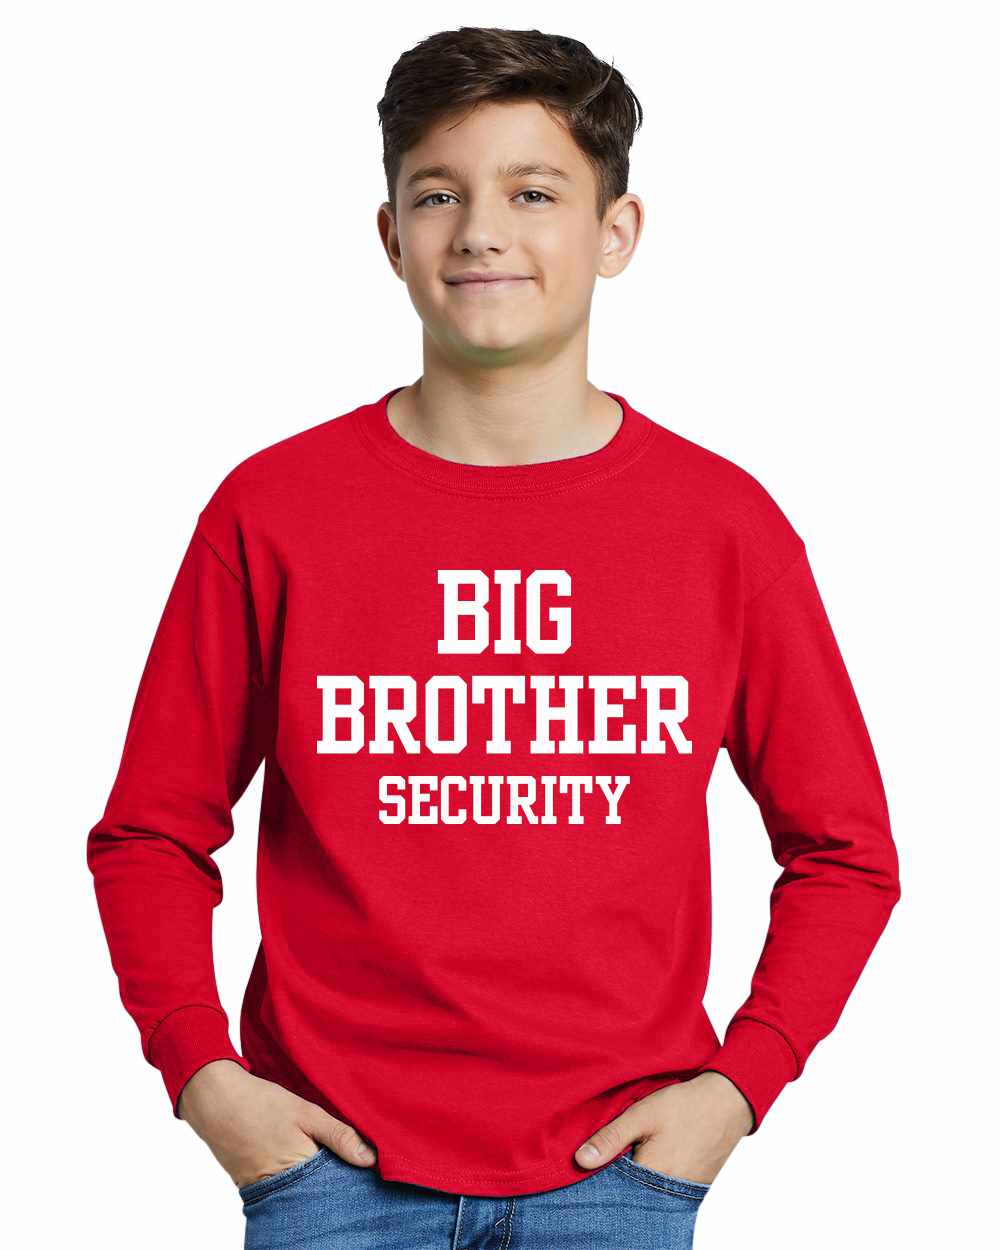 Big Brother Security on Youth Long Sleeve Shirt